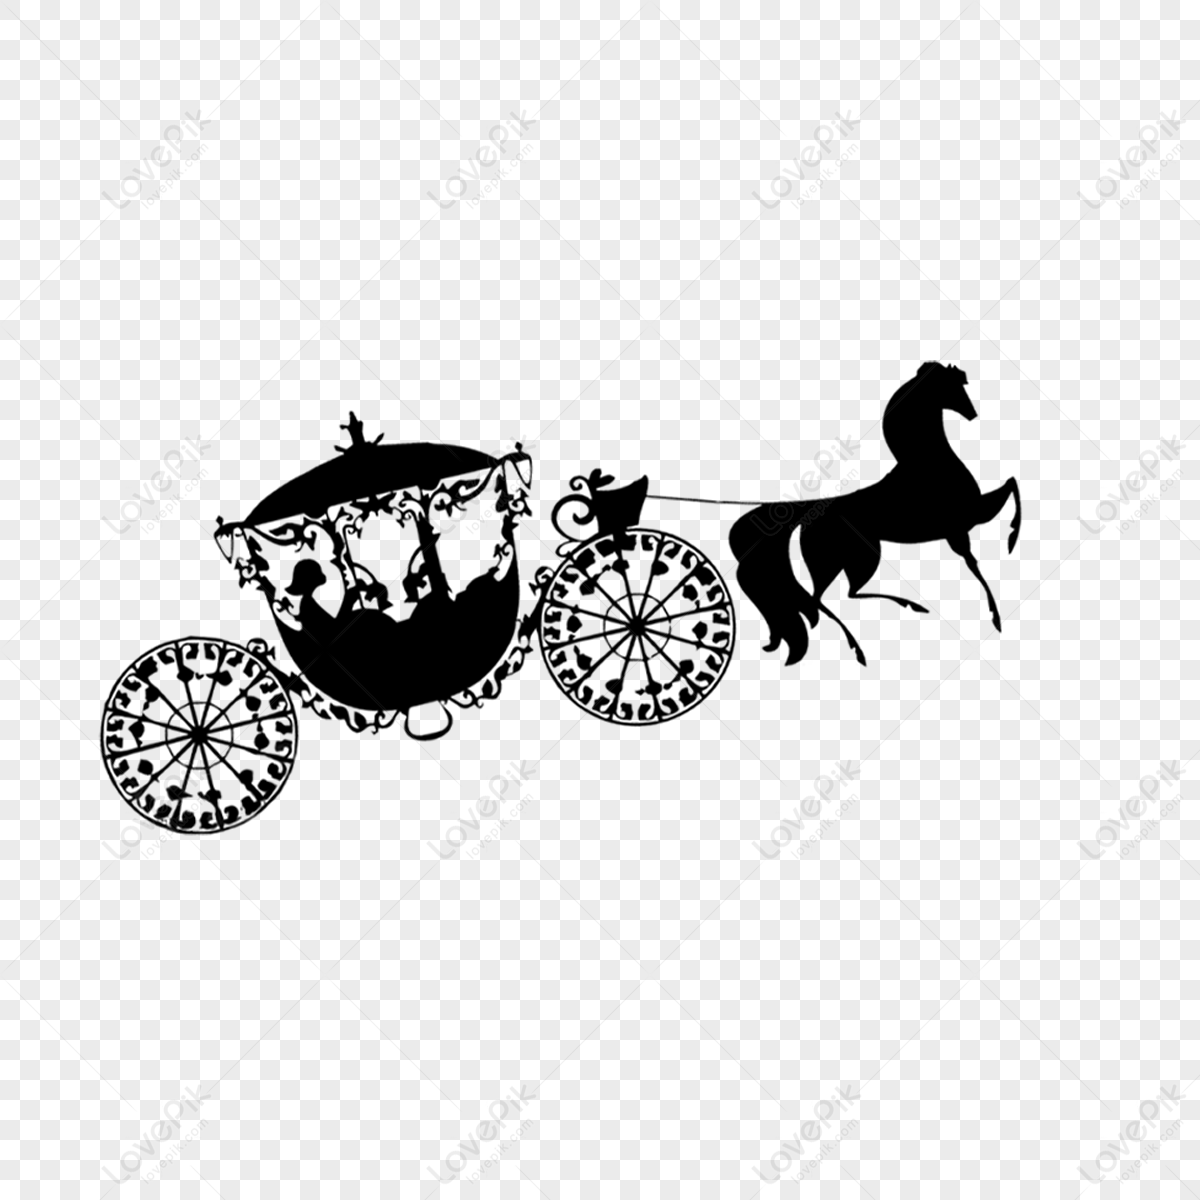 Pull the silhouette of the princess, horse silhouette, black silhouette, princess png transparent background